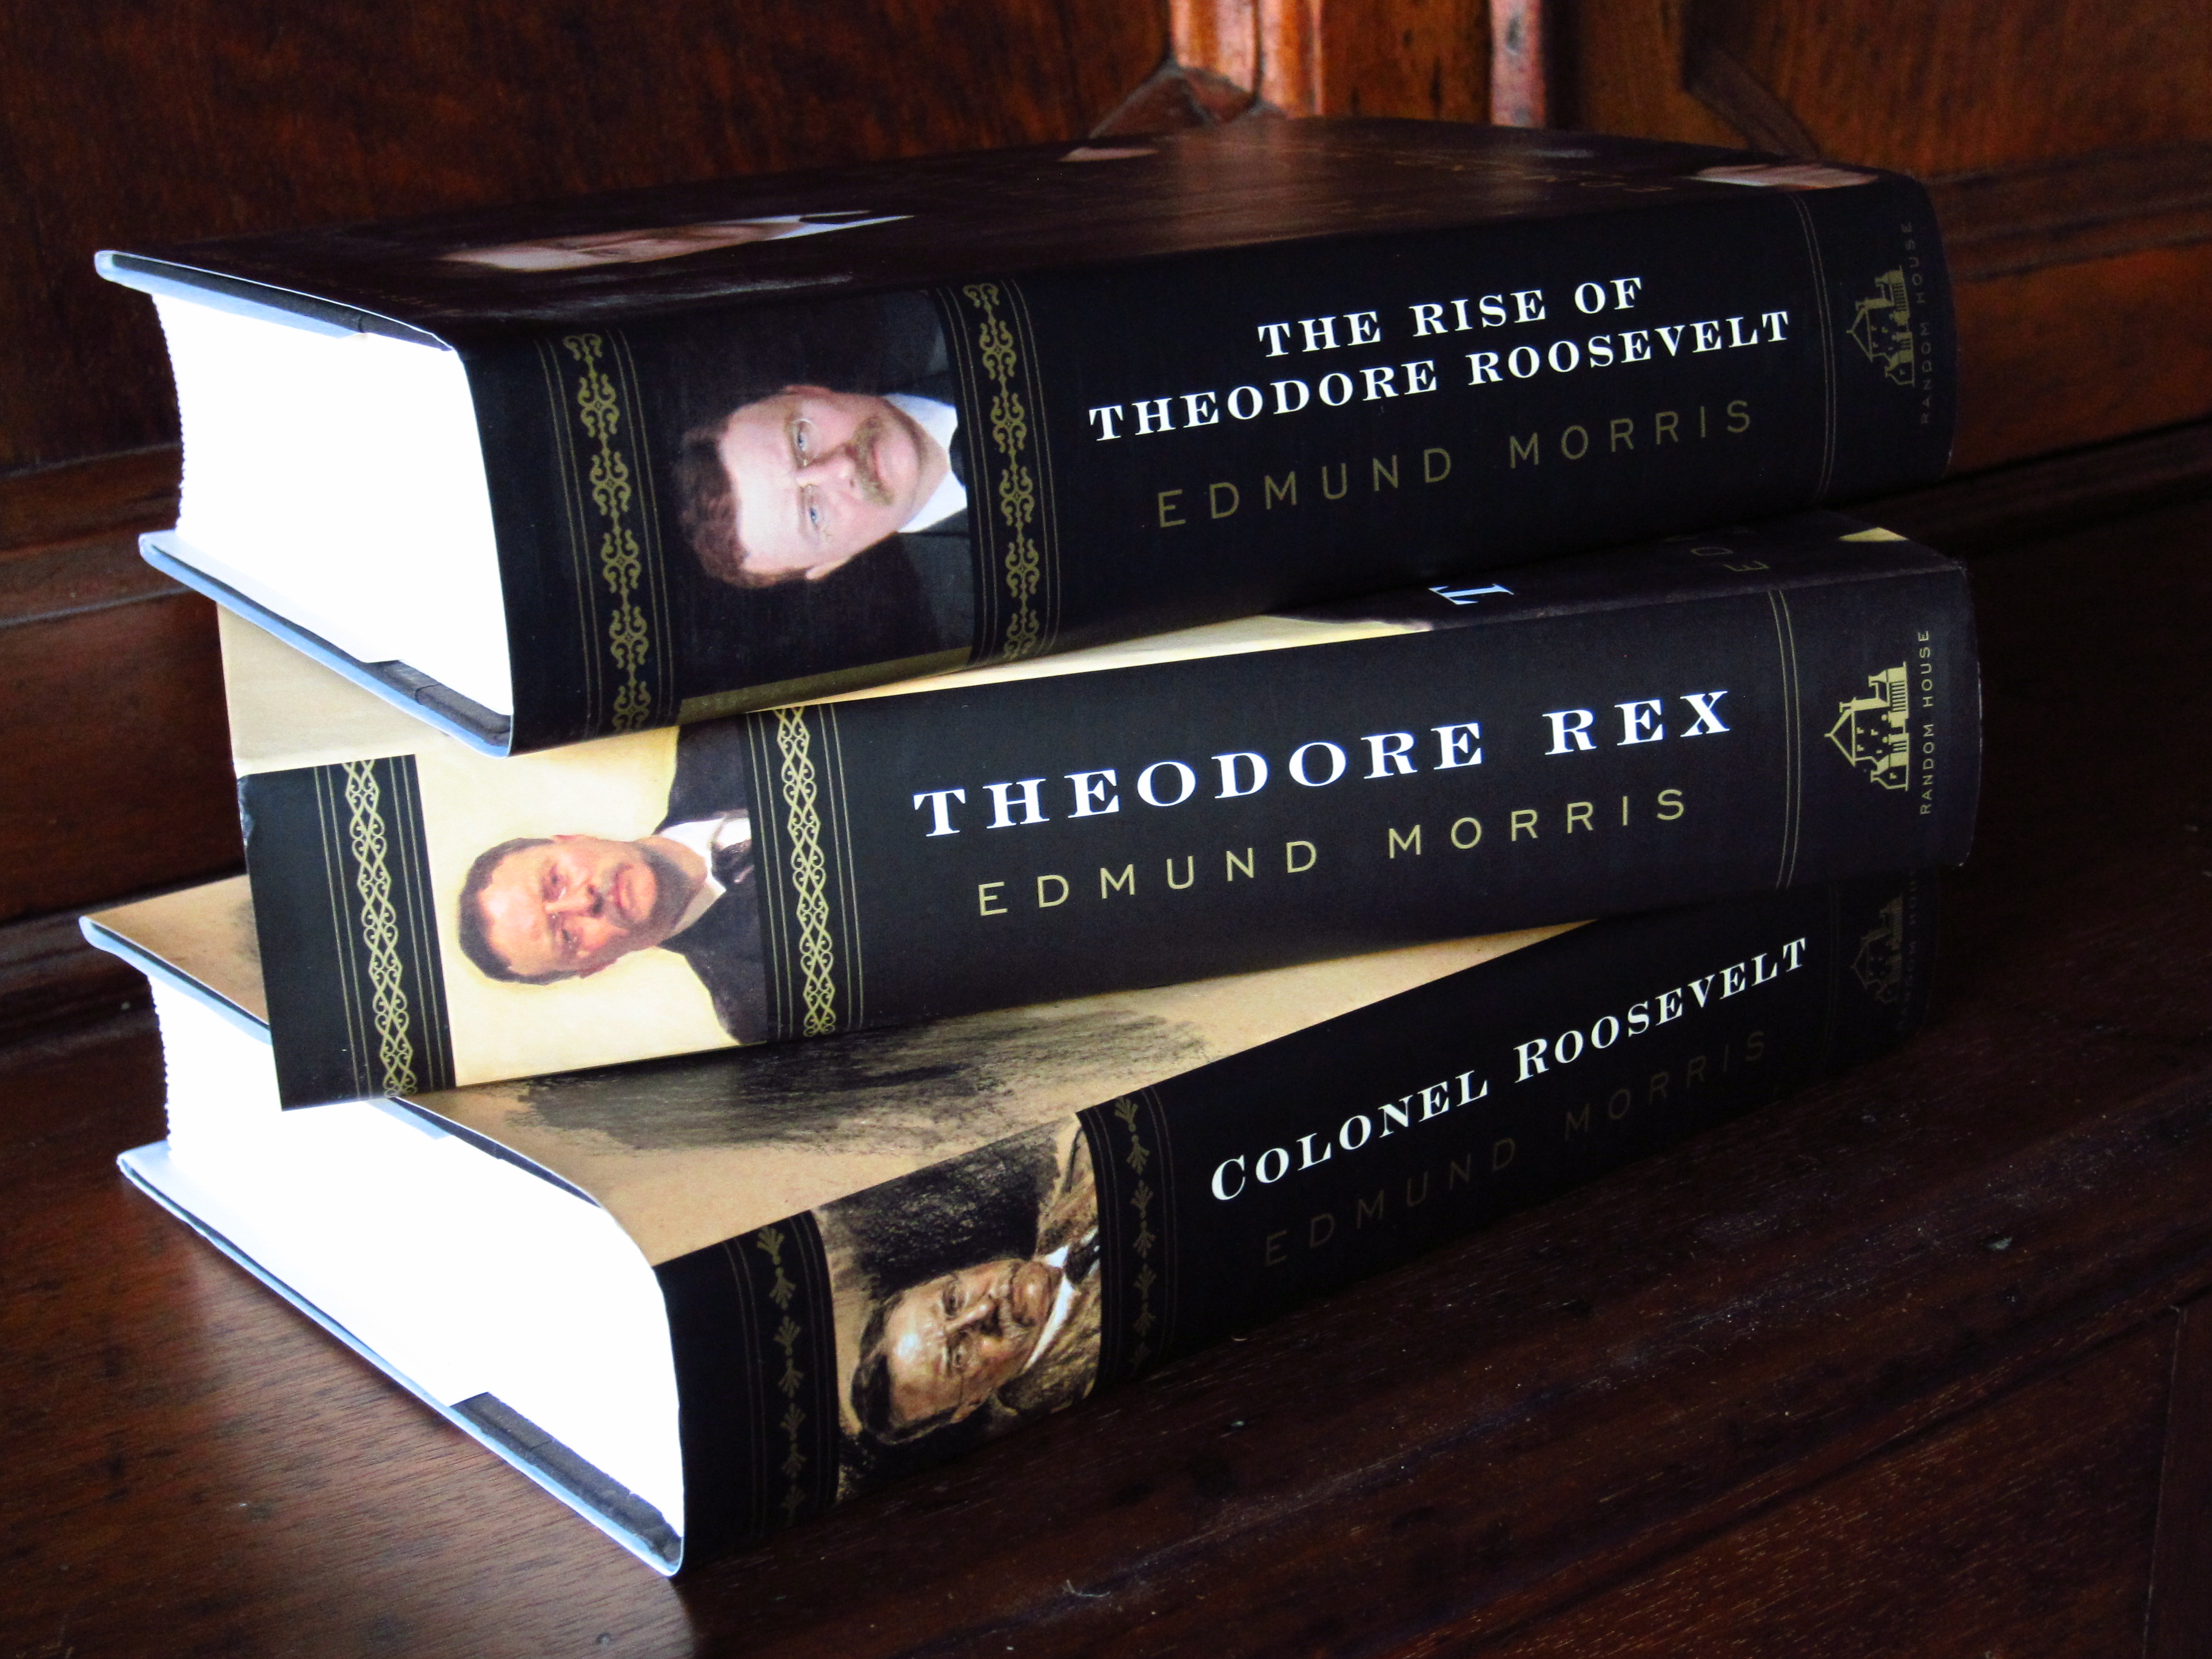 Biography of Theodore Roosevelt, by Edmund Morris